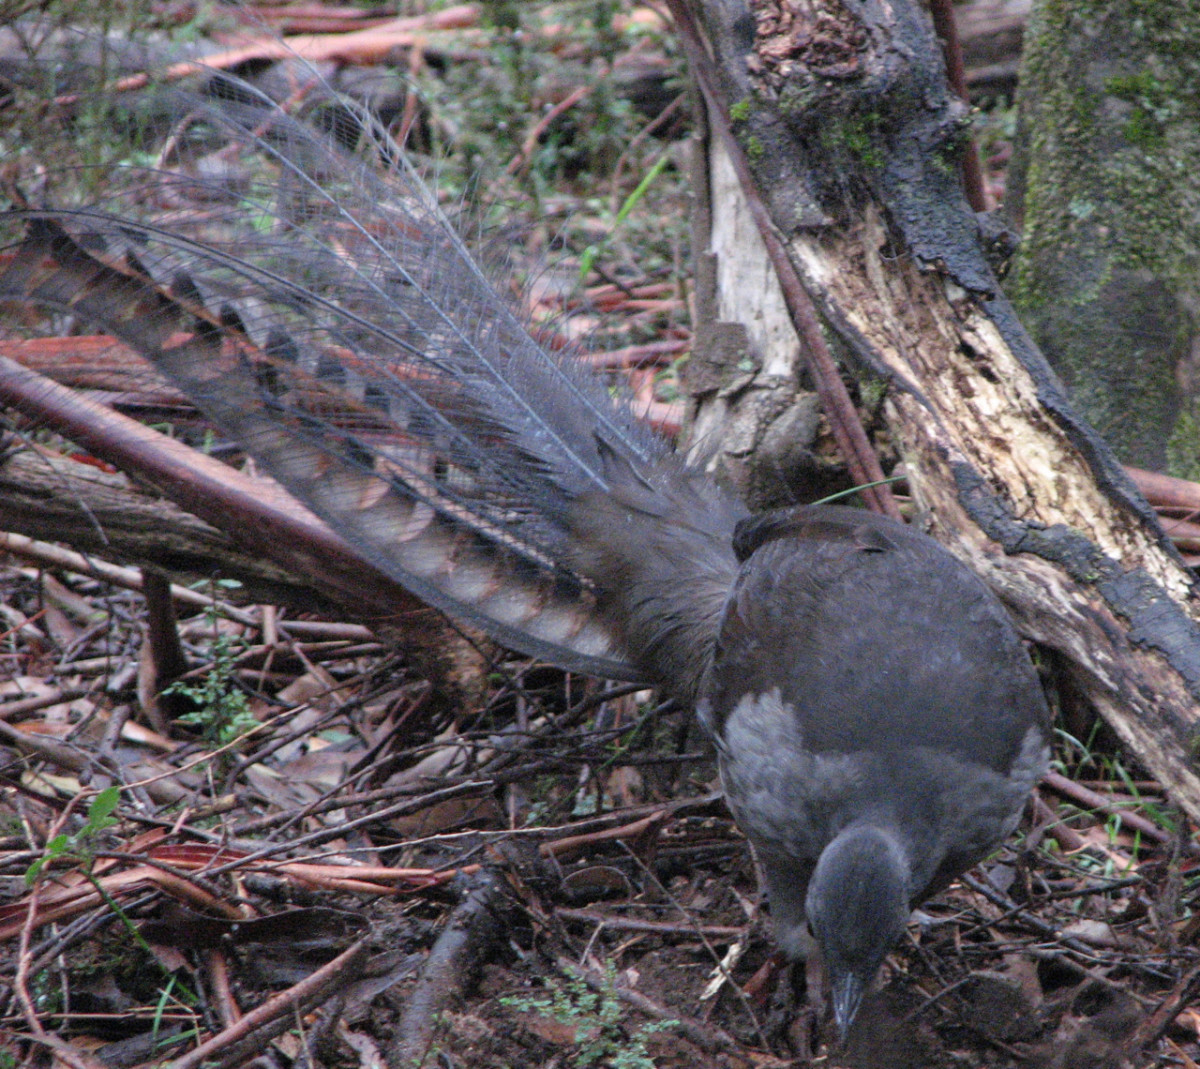 While I stood very still, the male lyrebird scratched nearby. Extremely hard to capture in the forest with dark light. Melbourne, Australia.